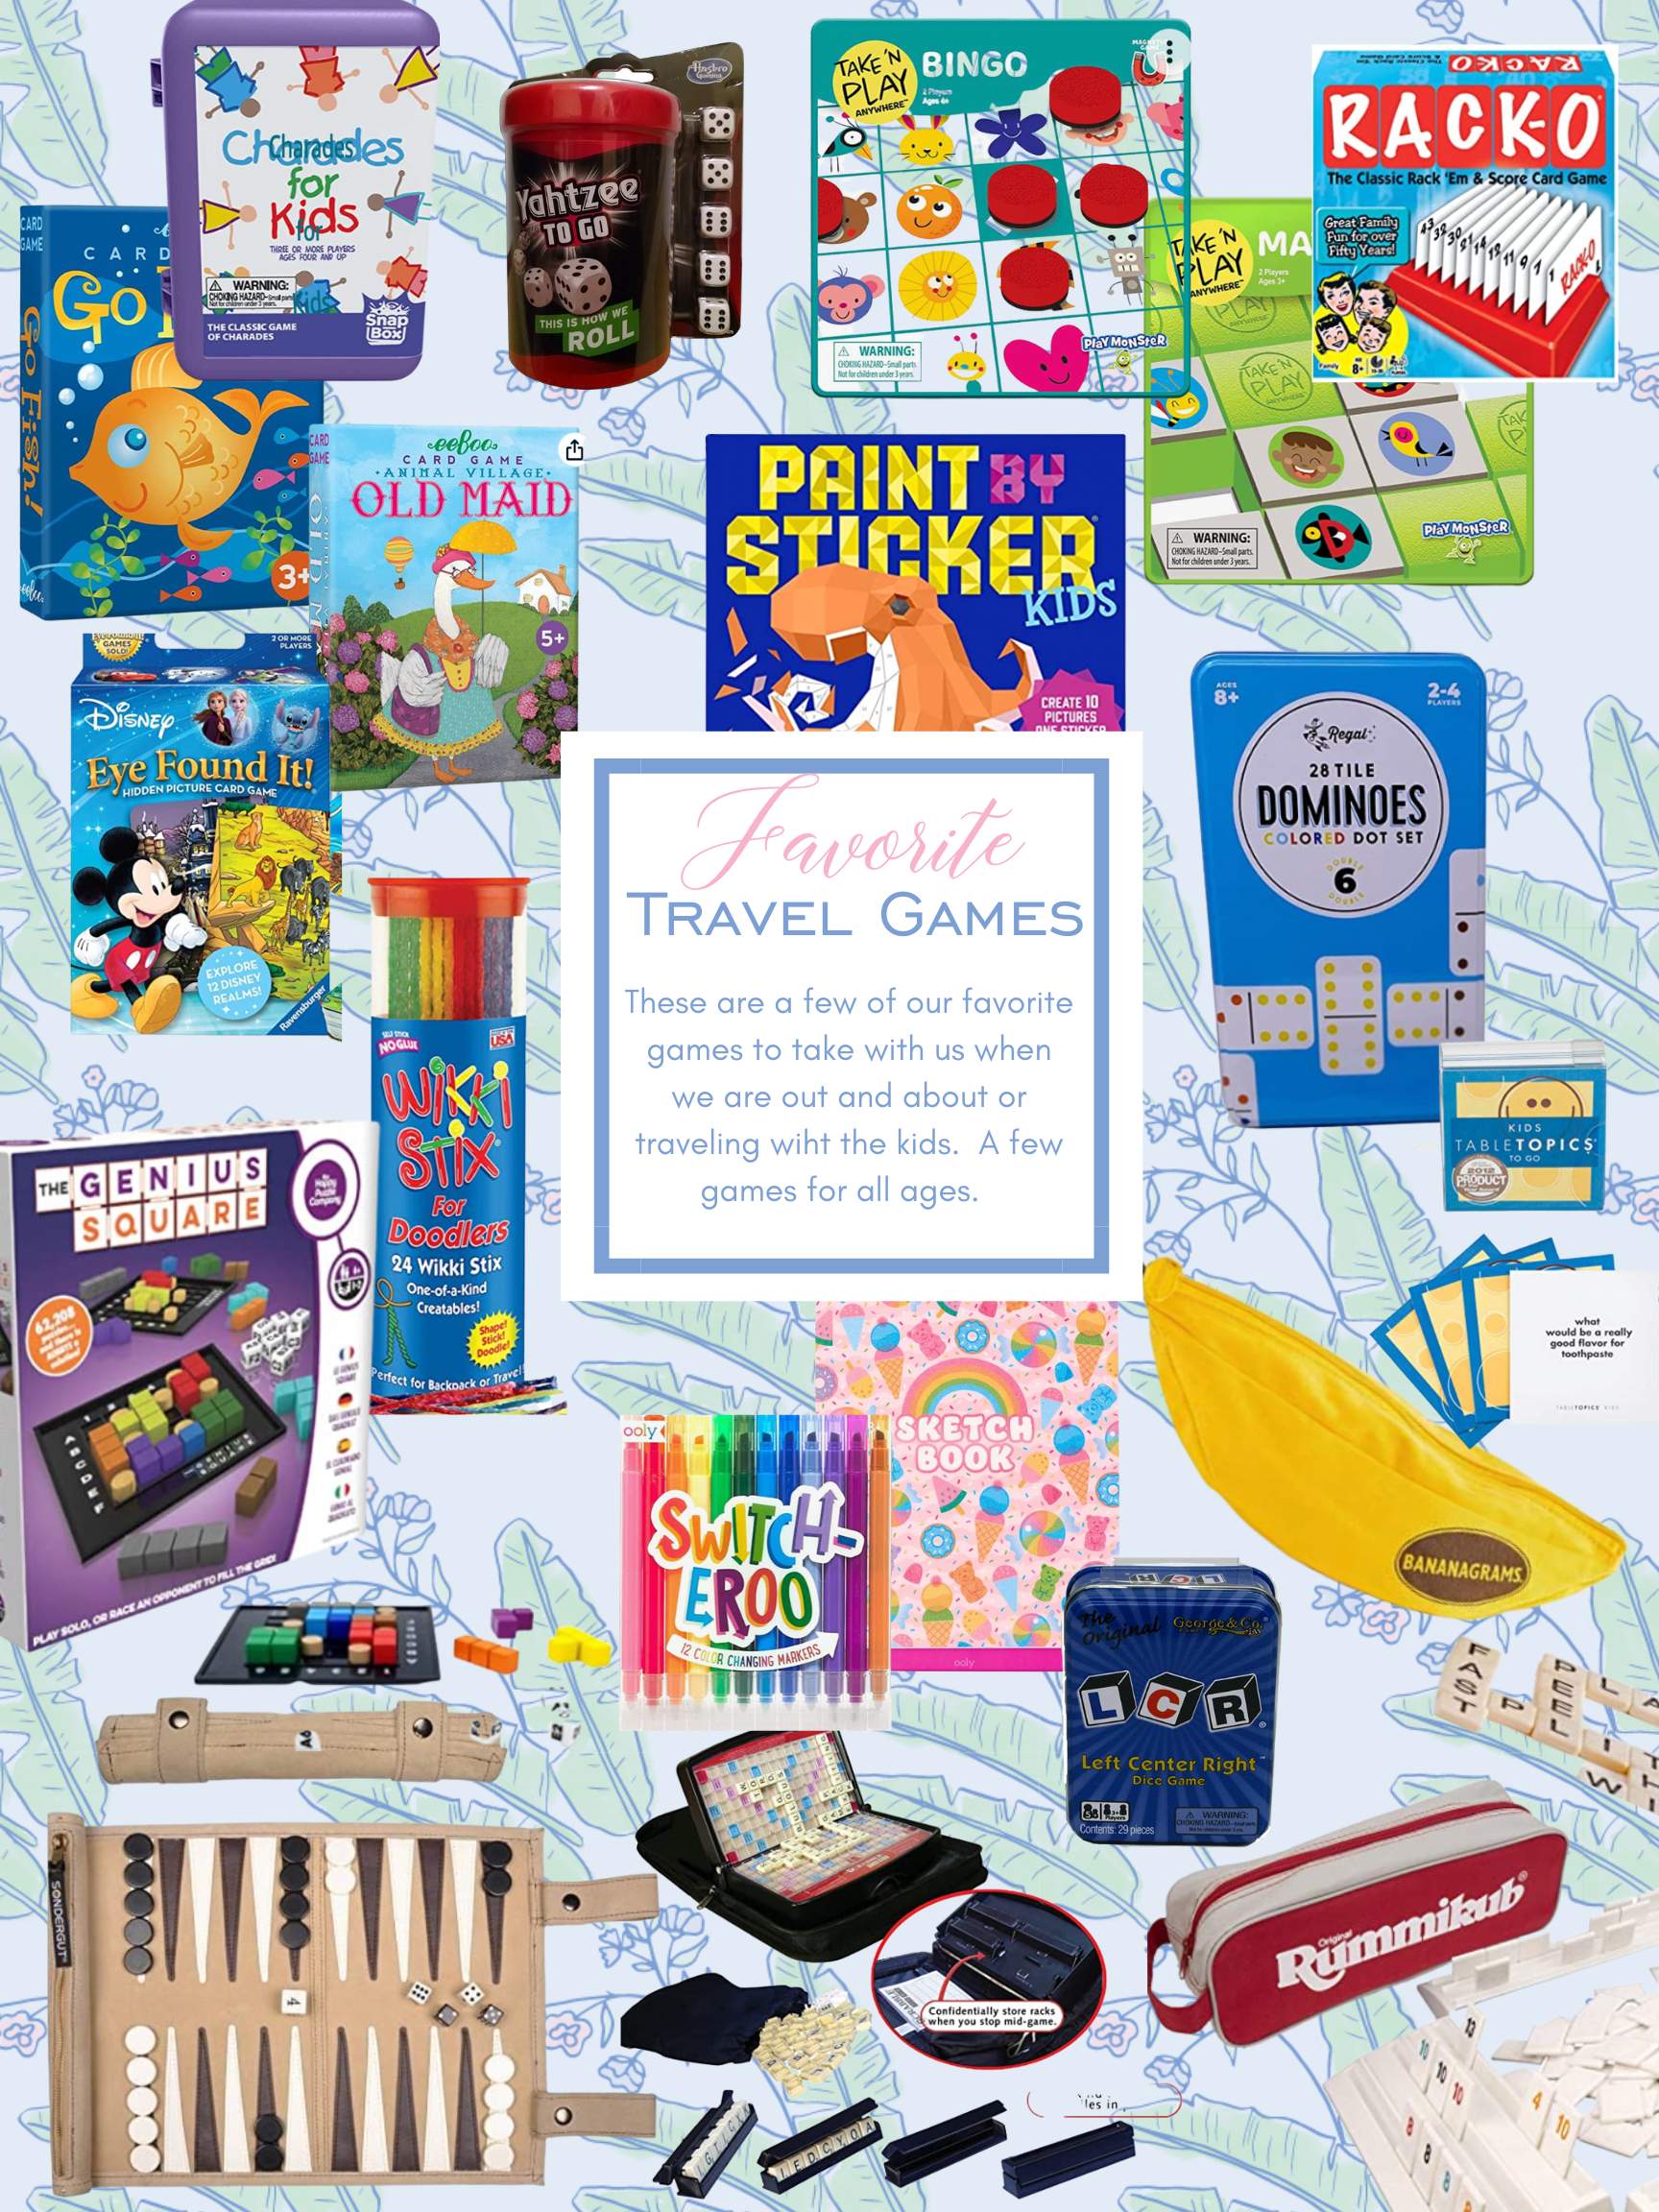 Our Favorite Travel Games for Kids - Home of Malones